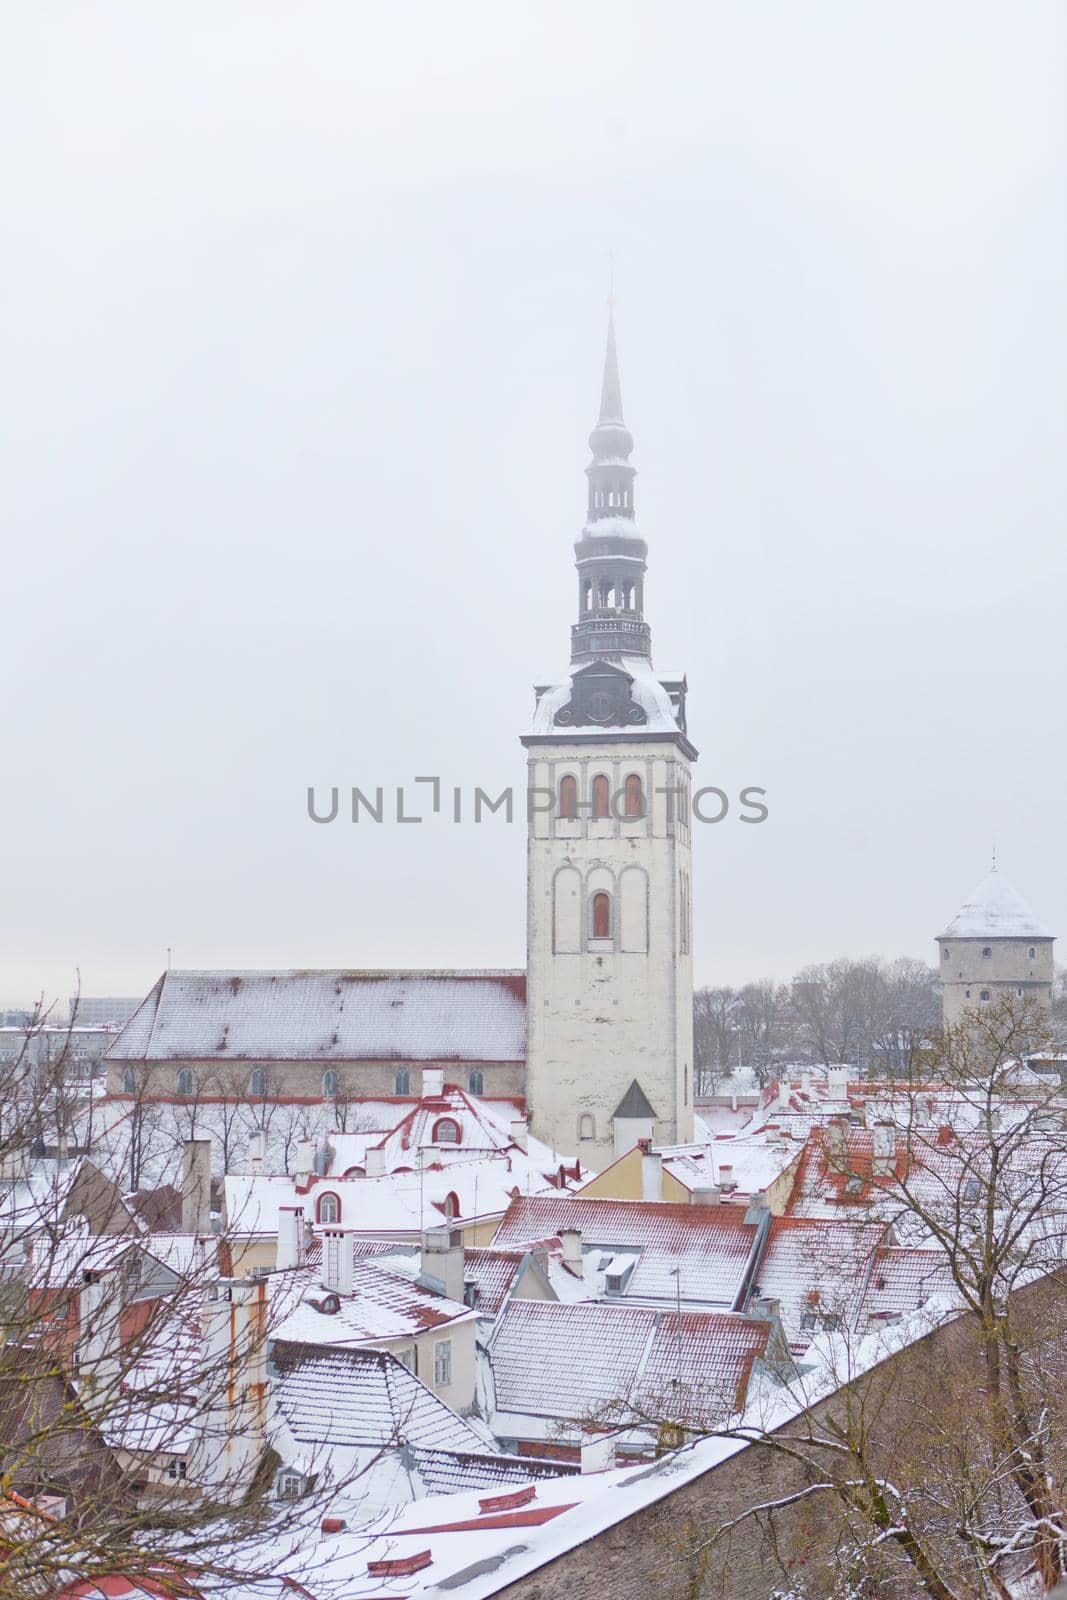 Old town of Tallinn, Estonia. Vertical photo of St. Nicholas Church, Niguliste facade. Snow and roofs of old town at winter time